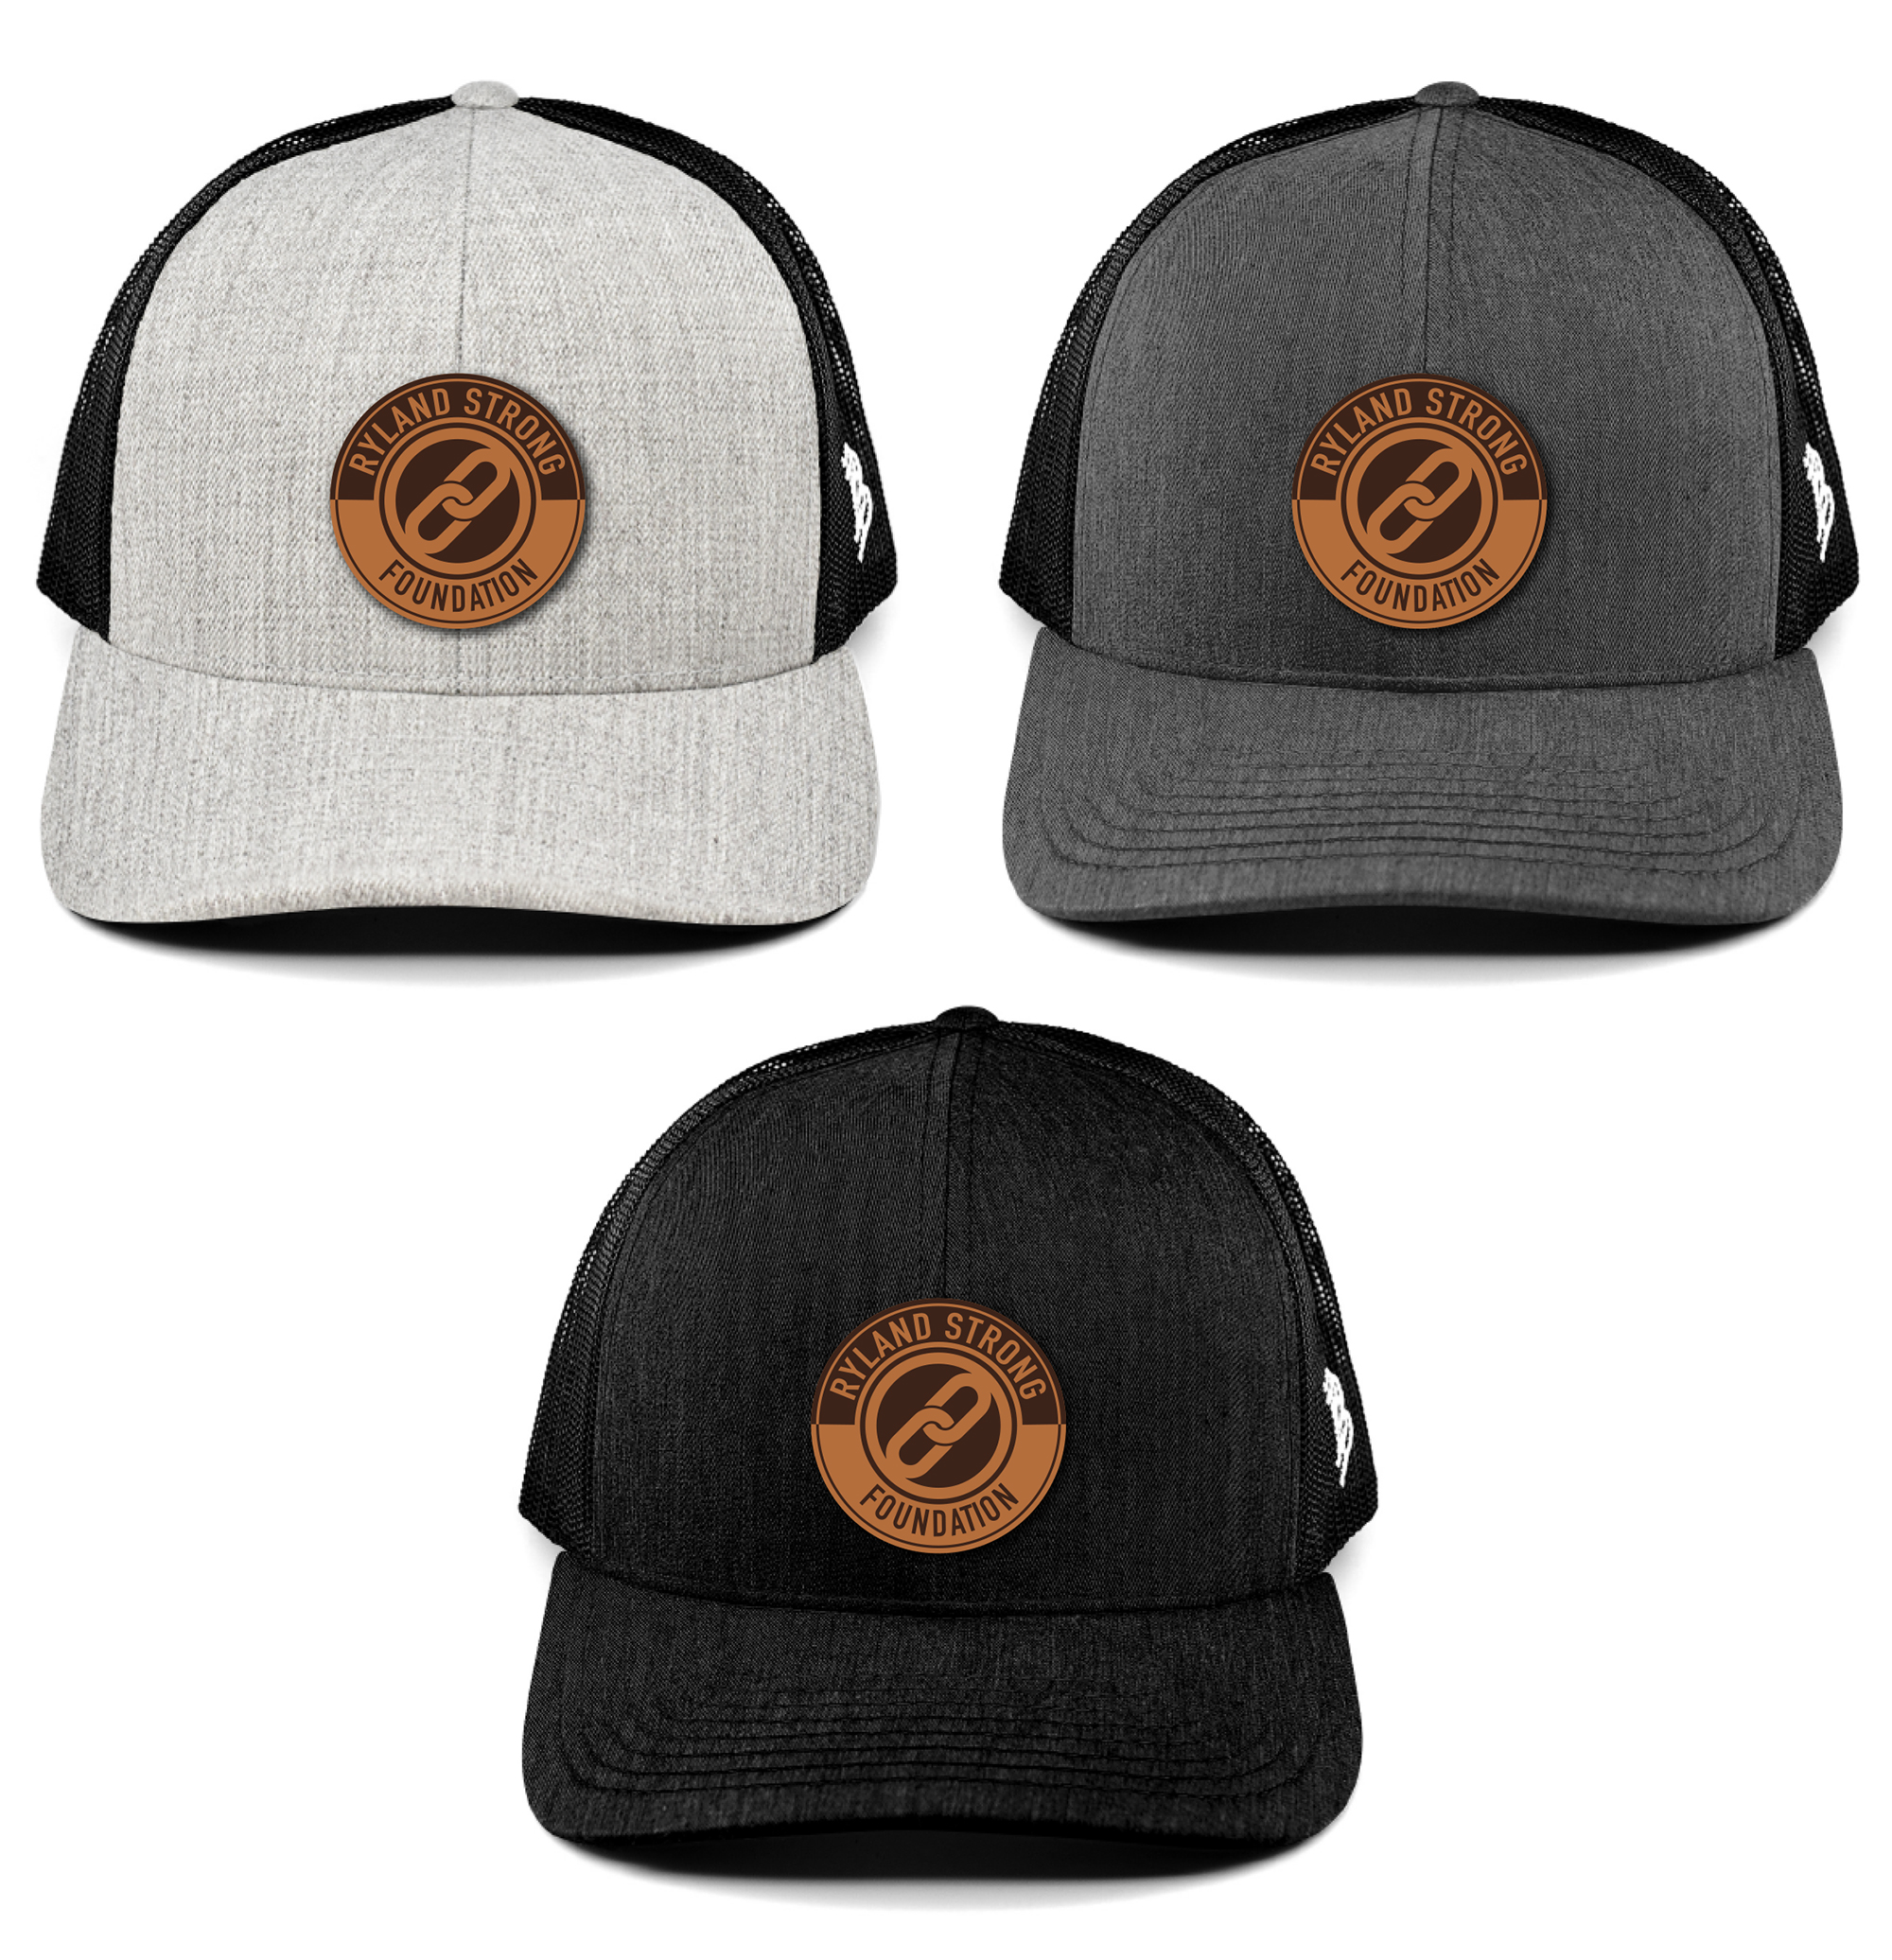 FlexFit Snapback Trucker Hat w/ Circular Ryland Strong Leather Patch